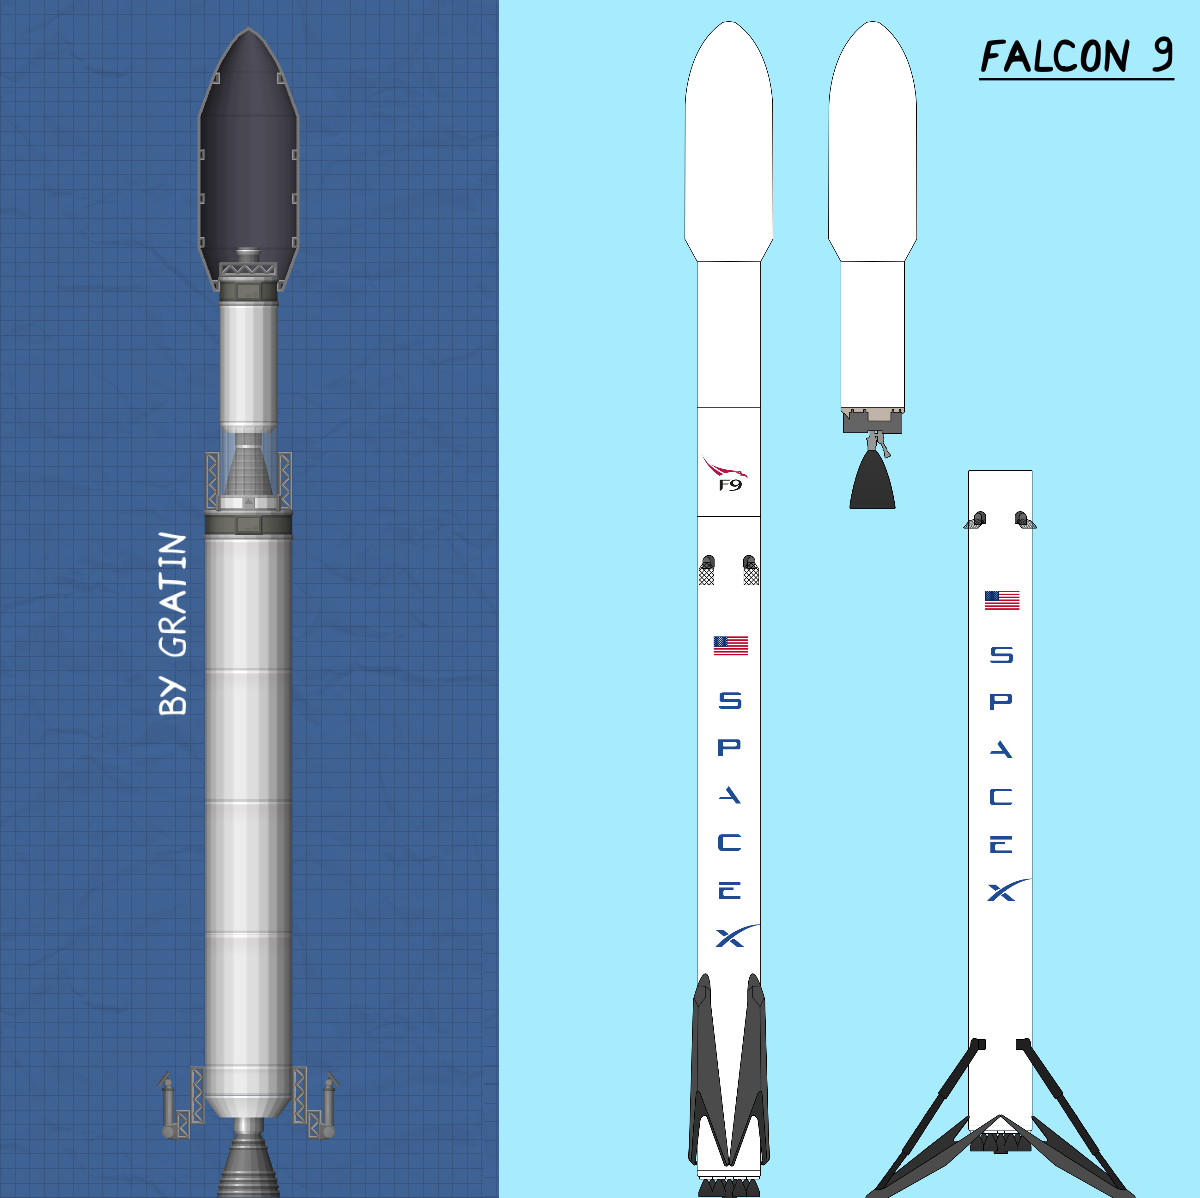 Image - Falcon 9.png | Spaceflight Simulator Wiki | FANDOM powered by Wikia